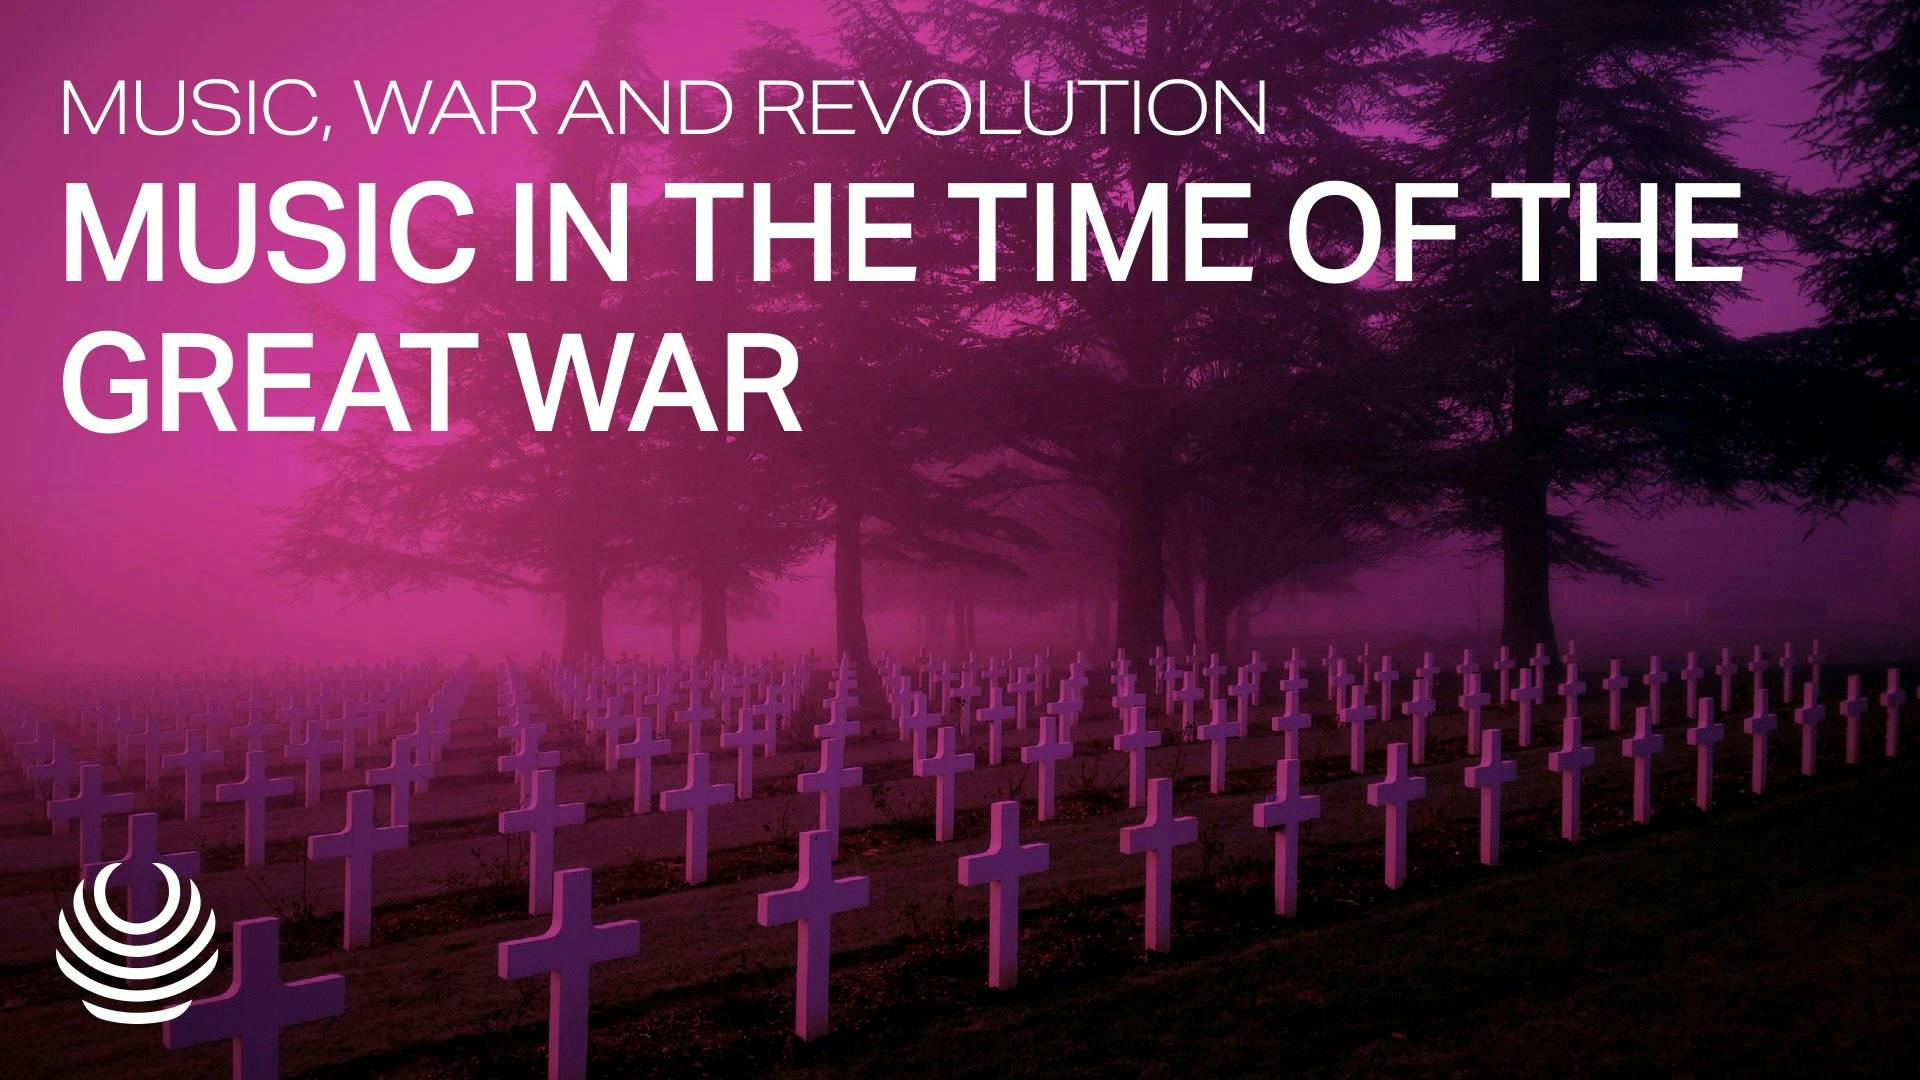 Music, War and Revolution - Music in the Time of the Great War